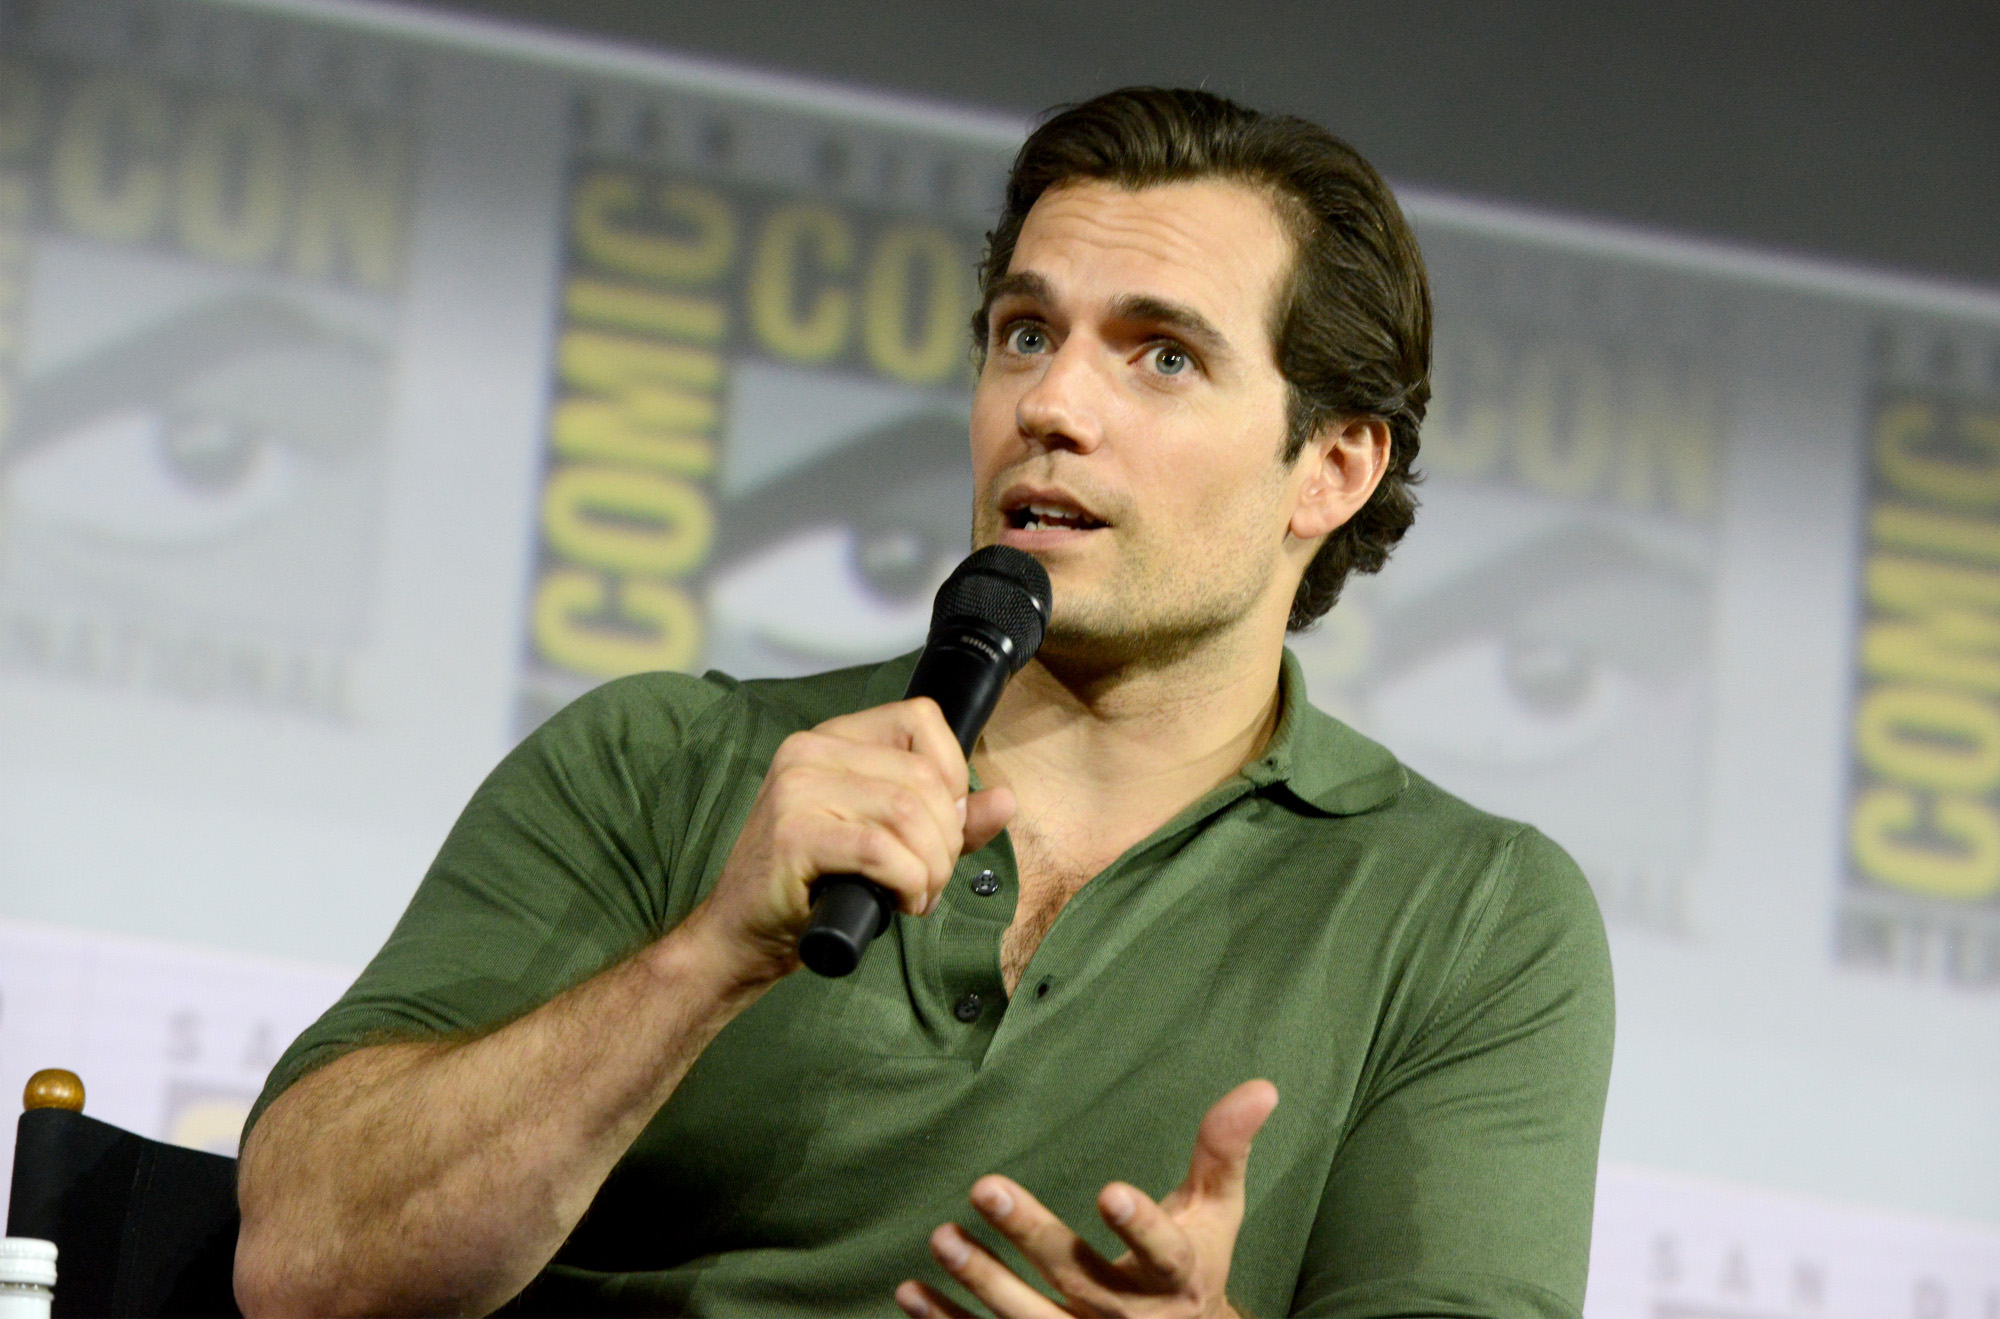 Superman star Henry Cavill during a Comic-Con panel for 'The Witcher.' The actor is wearing a green polo shirt and holding a microphone. He's speaking into it, and a Comic-Con wall is behind him.